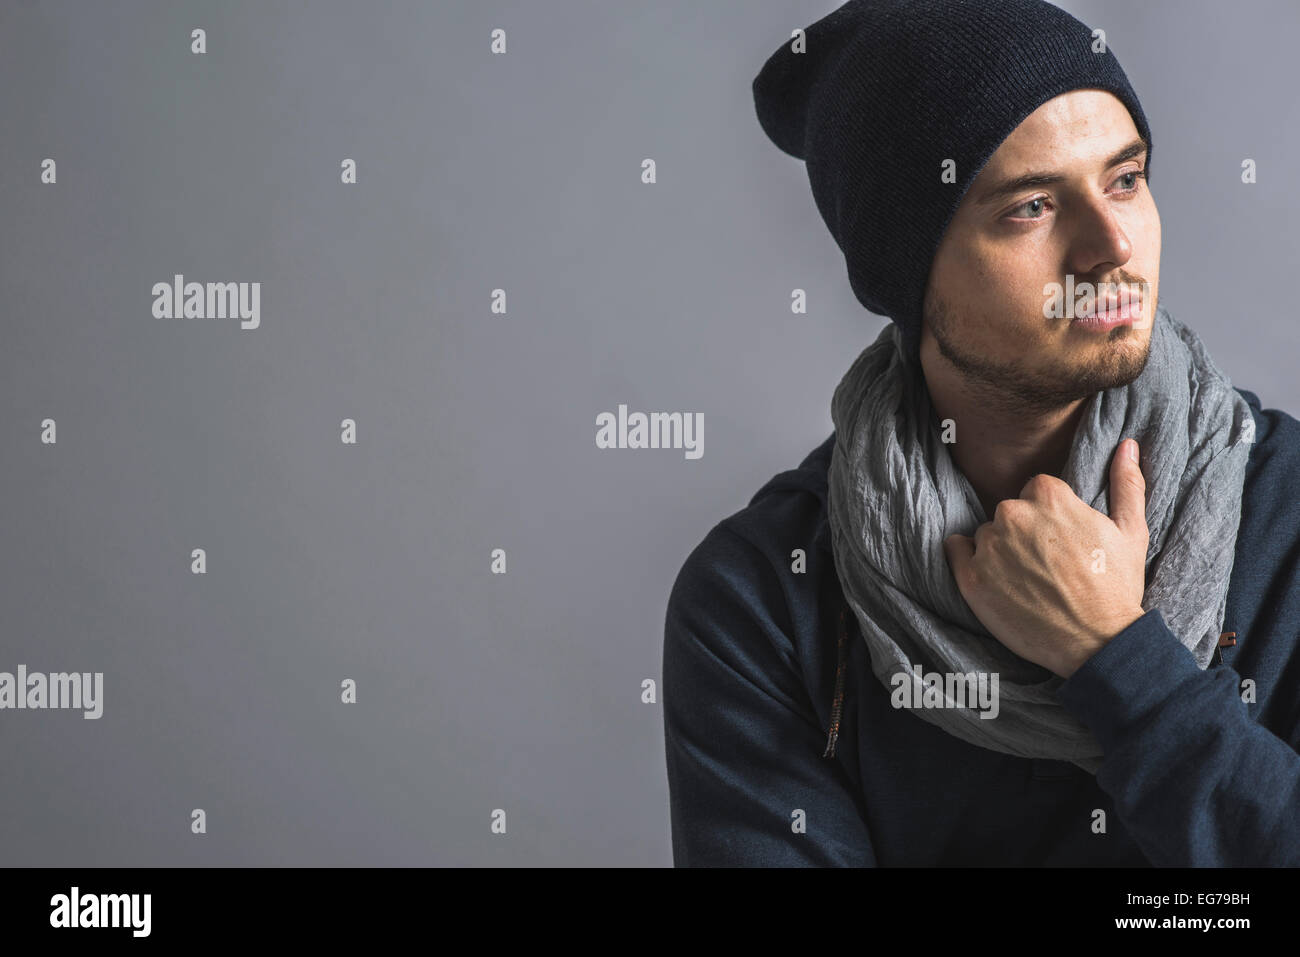 Portrait of pensive young man wearing wool cap and scarf in front of grey background Stock Photo